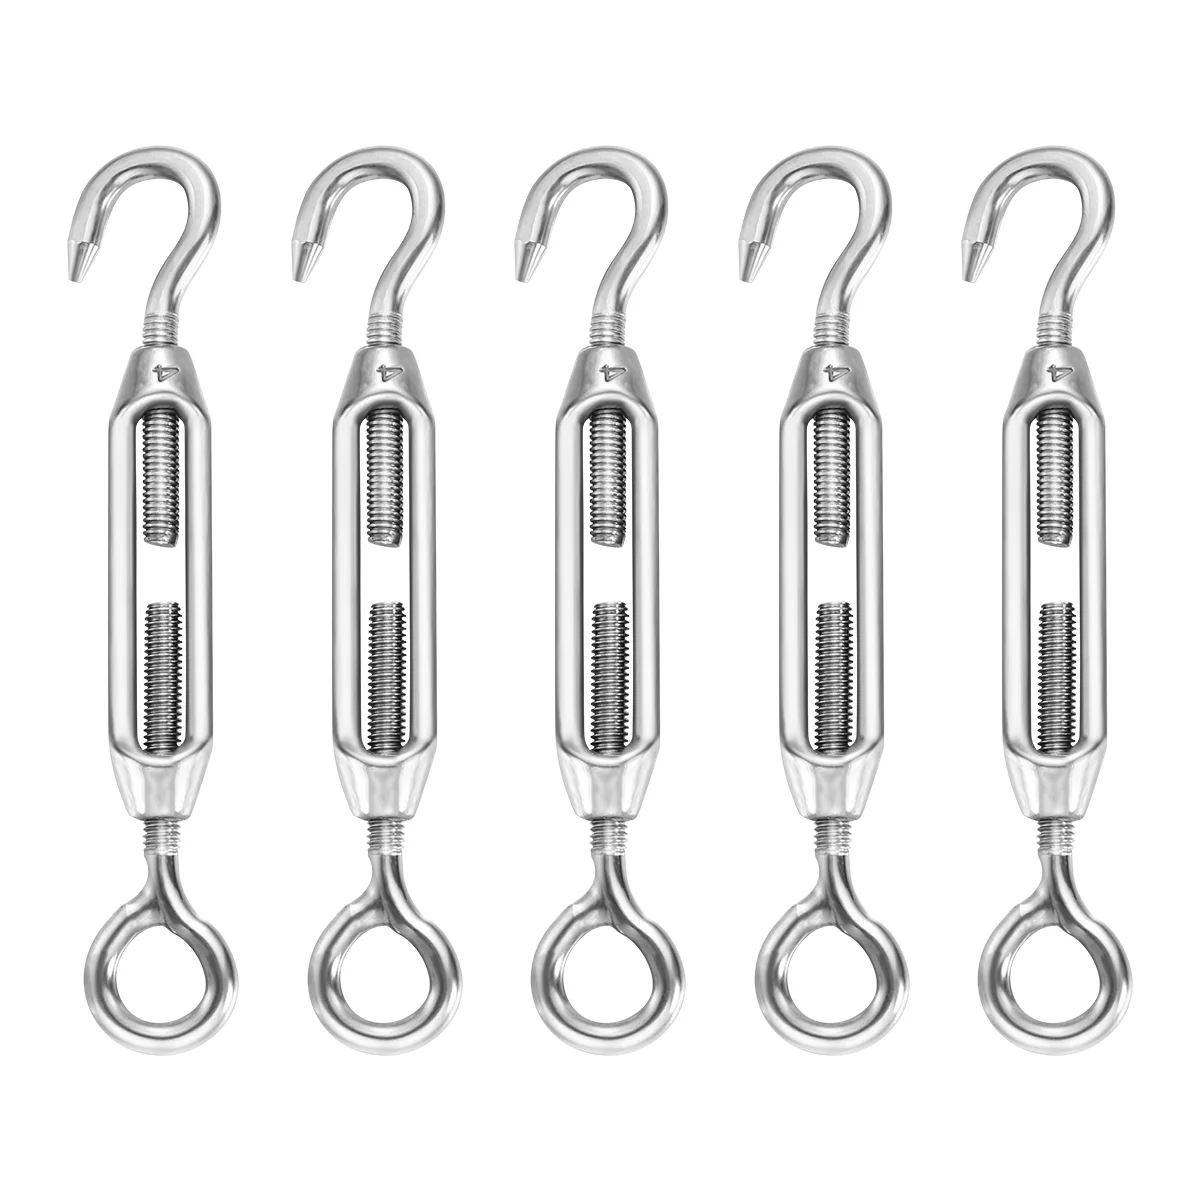 

WINOMO 5PCS Durable Wire Tension Hook Turnbuckle Rope Tension for Outdoor Installation Indoor